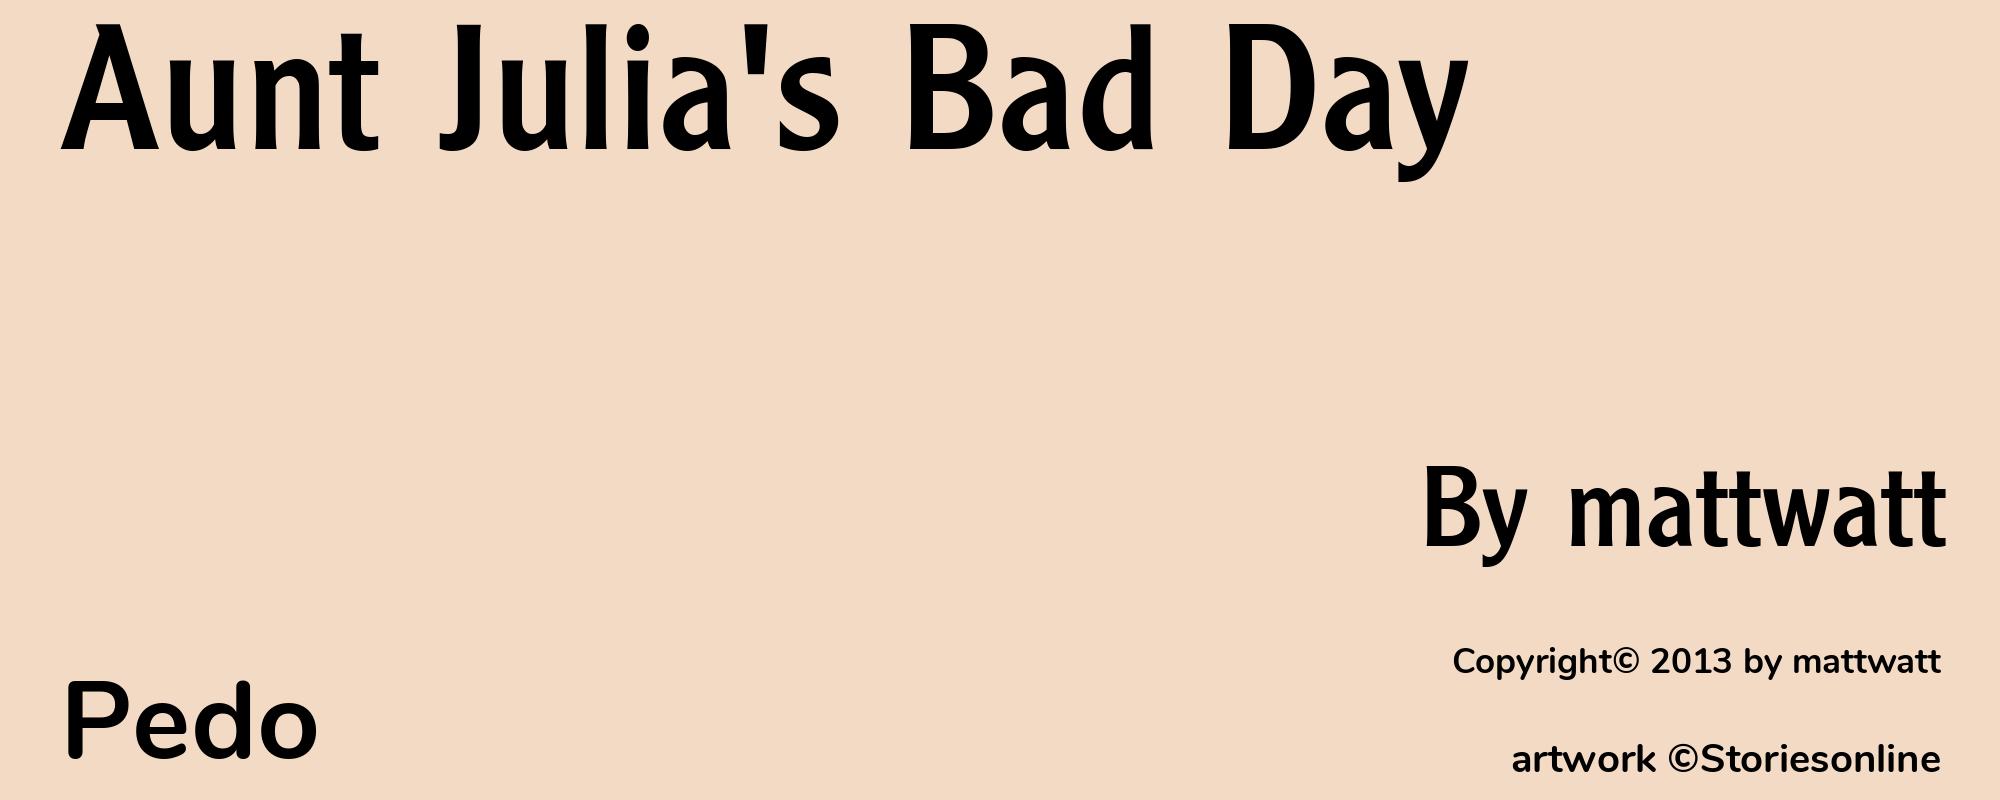 Aunt Julia's Bad Day - Cover